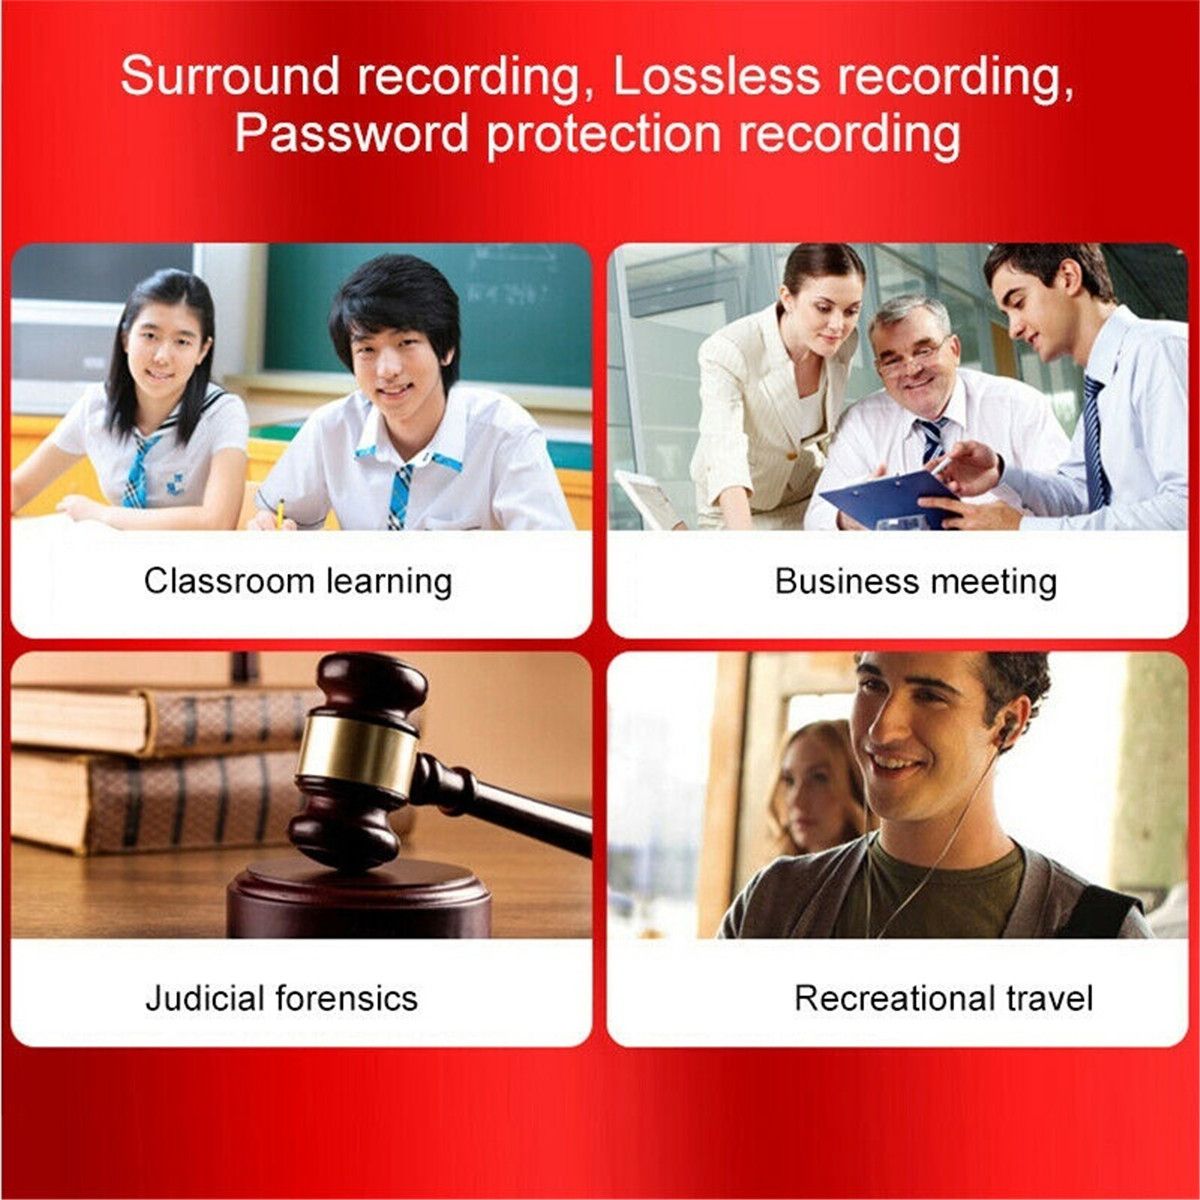 Digital-Voice-Recorder-20-Hour-Recording-MP3-Player-Mini-Voice-Recording-Pen-for-Lectures-Meetings-I-1597503